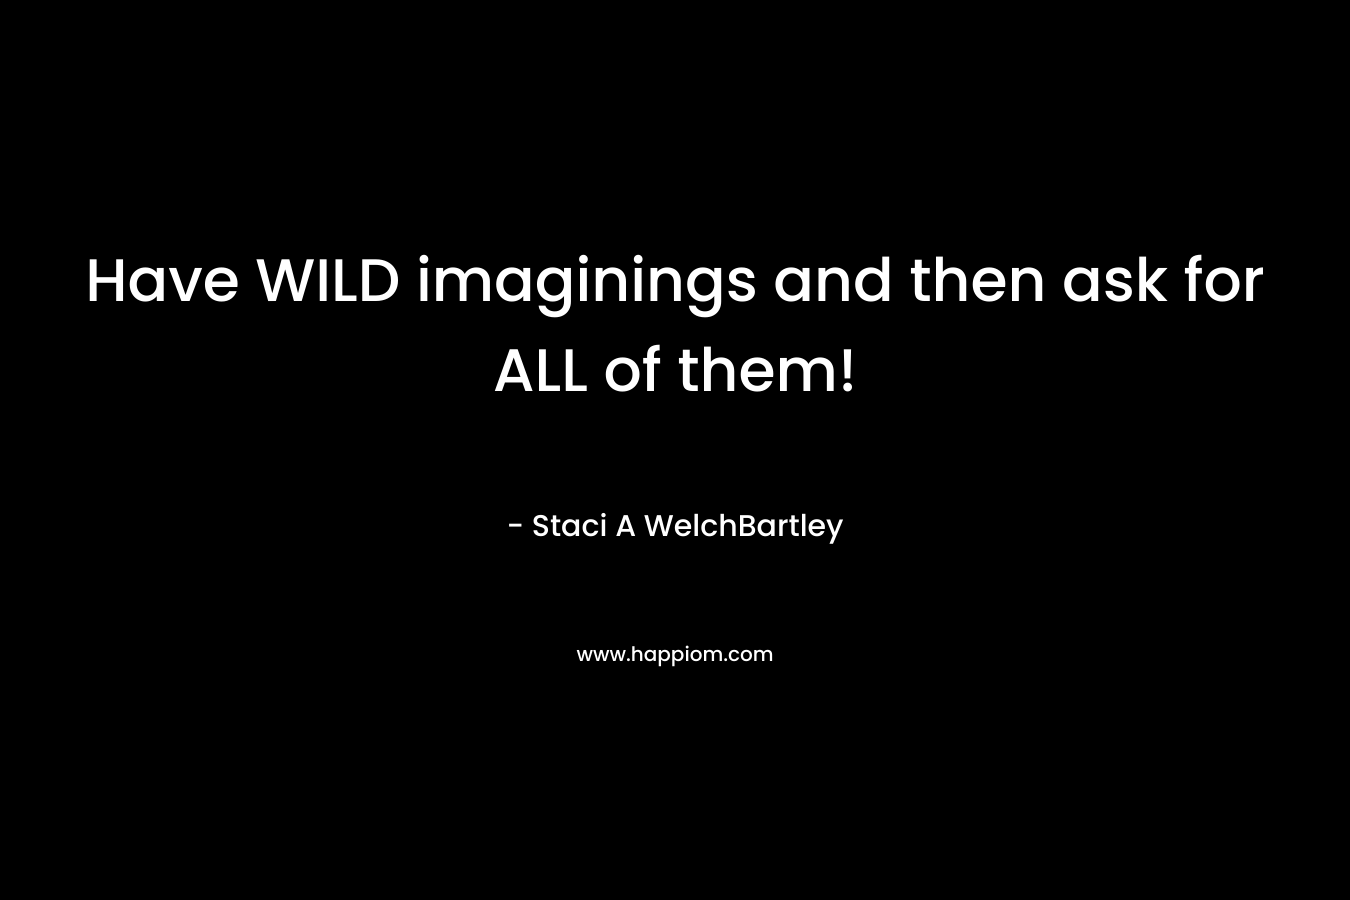 Have WILD imaginings and then ask for ALL of them!